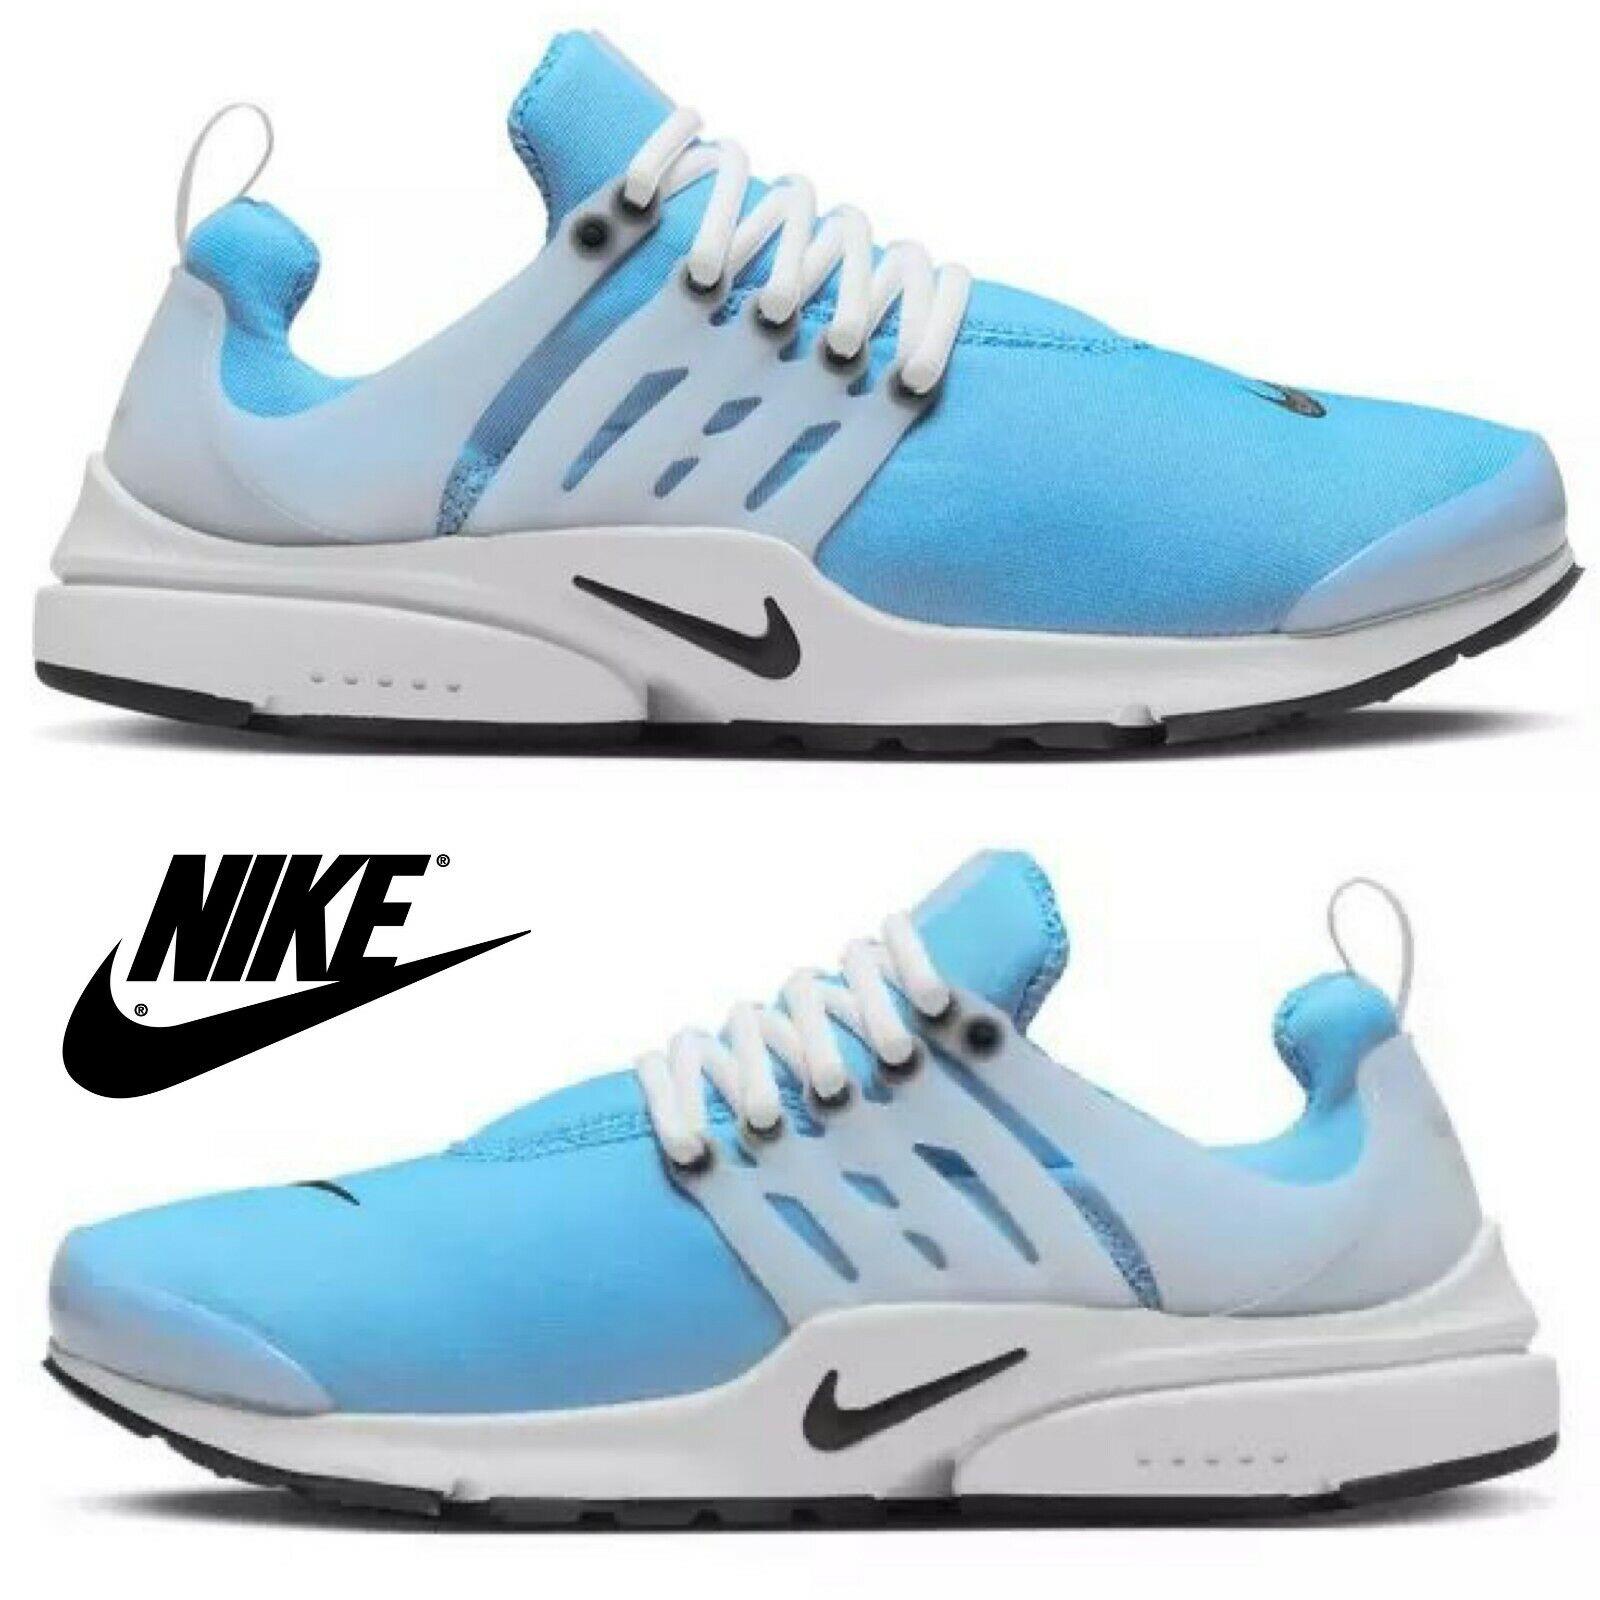 Nike Air Presto Running Sneakers Men`s Athletic Comfort Casual Shoes Light Blue